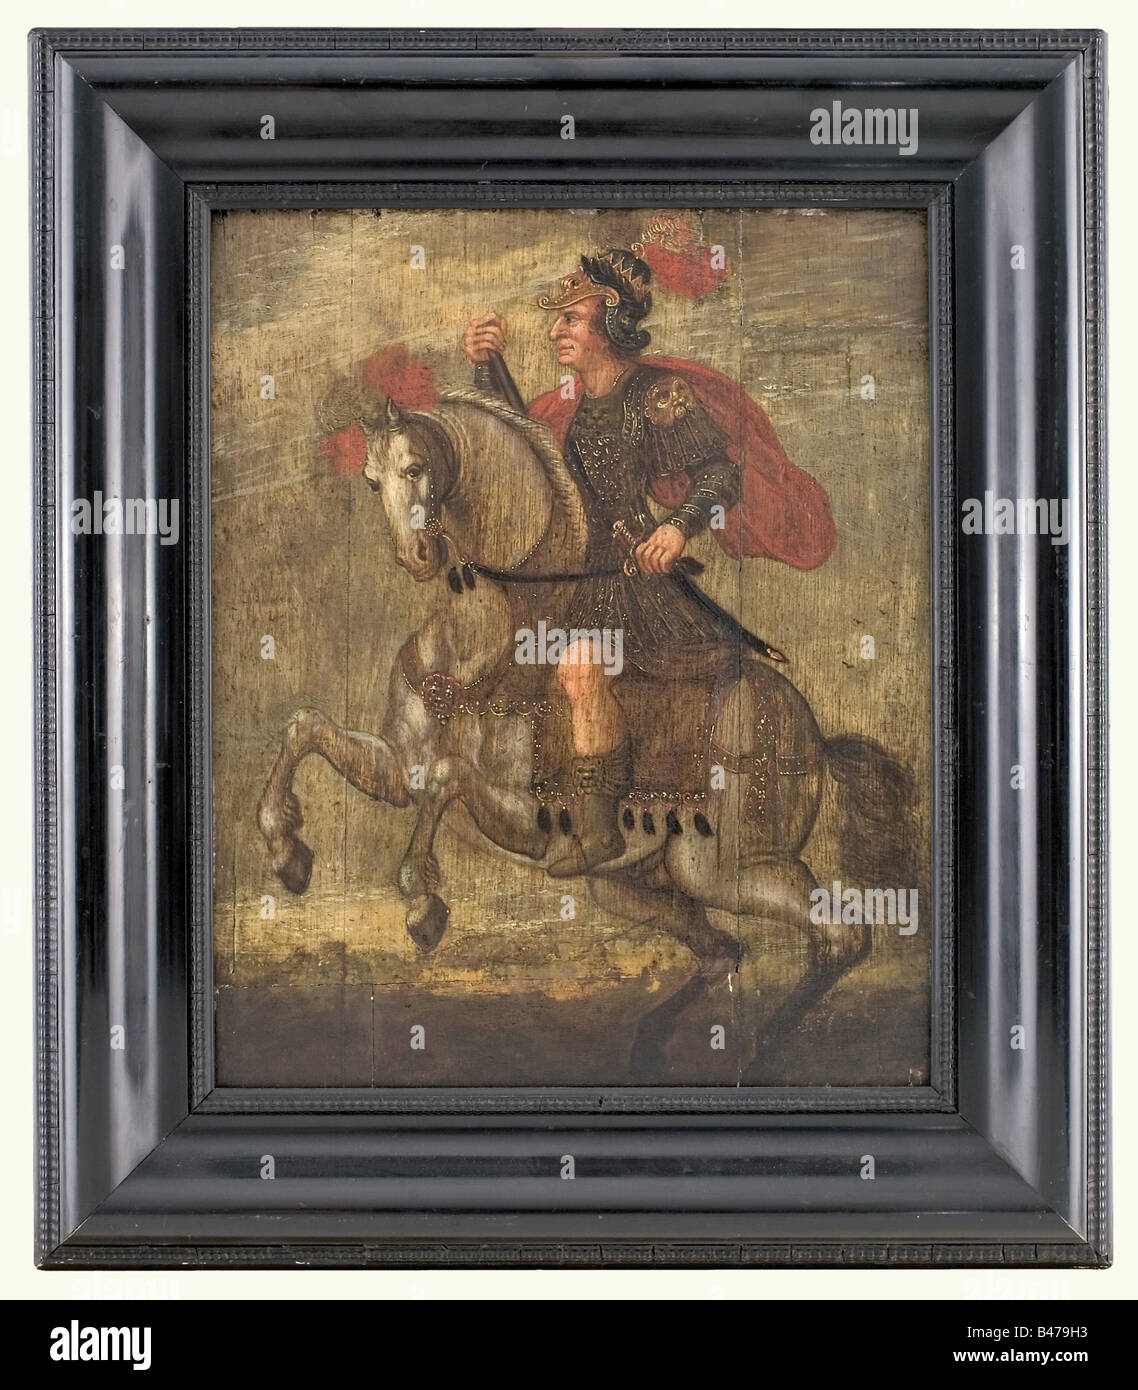 A Commander on horseback, Spain, 17th century. Oil on wood. A commander in ancient-style armour on a rearing horse in front of a suggested landscape. Restored on the upper right, parqueted. In an ebonised profile frame. Size of the panel 43 x 53 cm, framed 62 x 72 cm. Appealing portrayal of an ancient commander, probably Julius Caesar, which indicates the influence of Peter Paul Rubens. fine arts, people, 17th century, fine arts, art, painting, paintings, object, objects, stills, clipping, clippings, cut out, cut-out, cut-outs, man, men, male, Artist's Copyright has not to be cleared Stock Photo